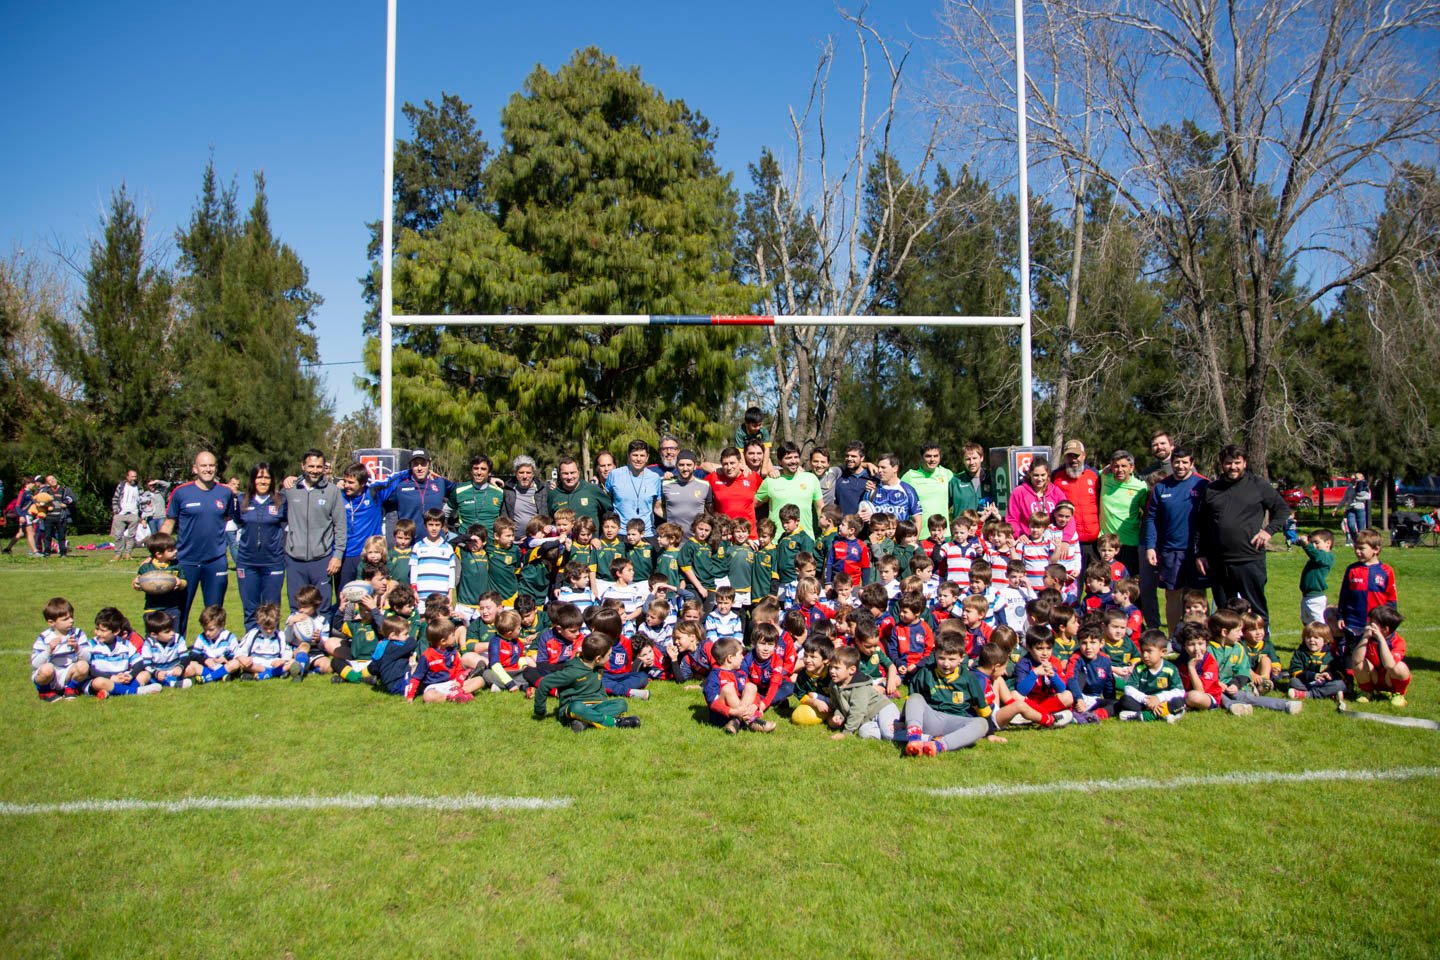 https://clubsanluis.com.ar/wp-content/uploads/2019/09/sl-31-8-inf-rugby-23.jpg